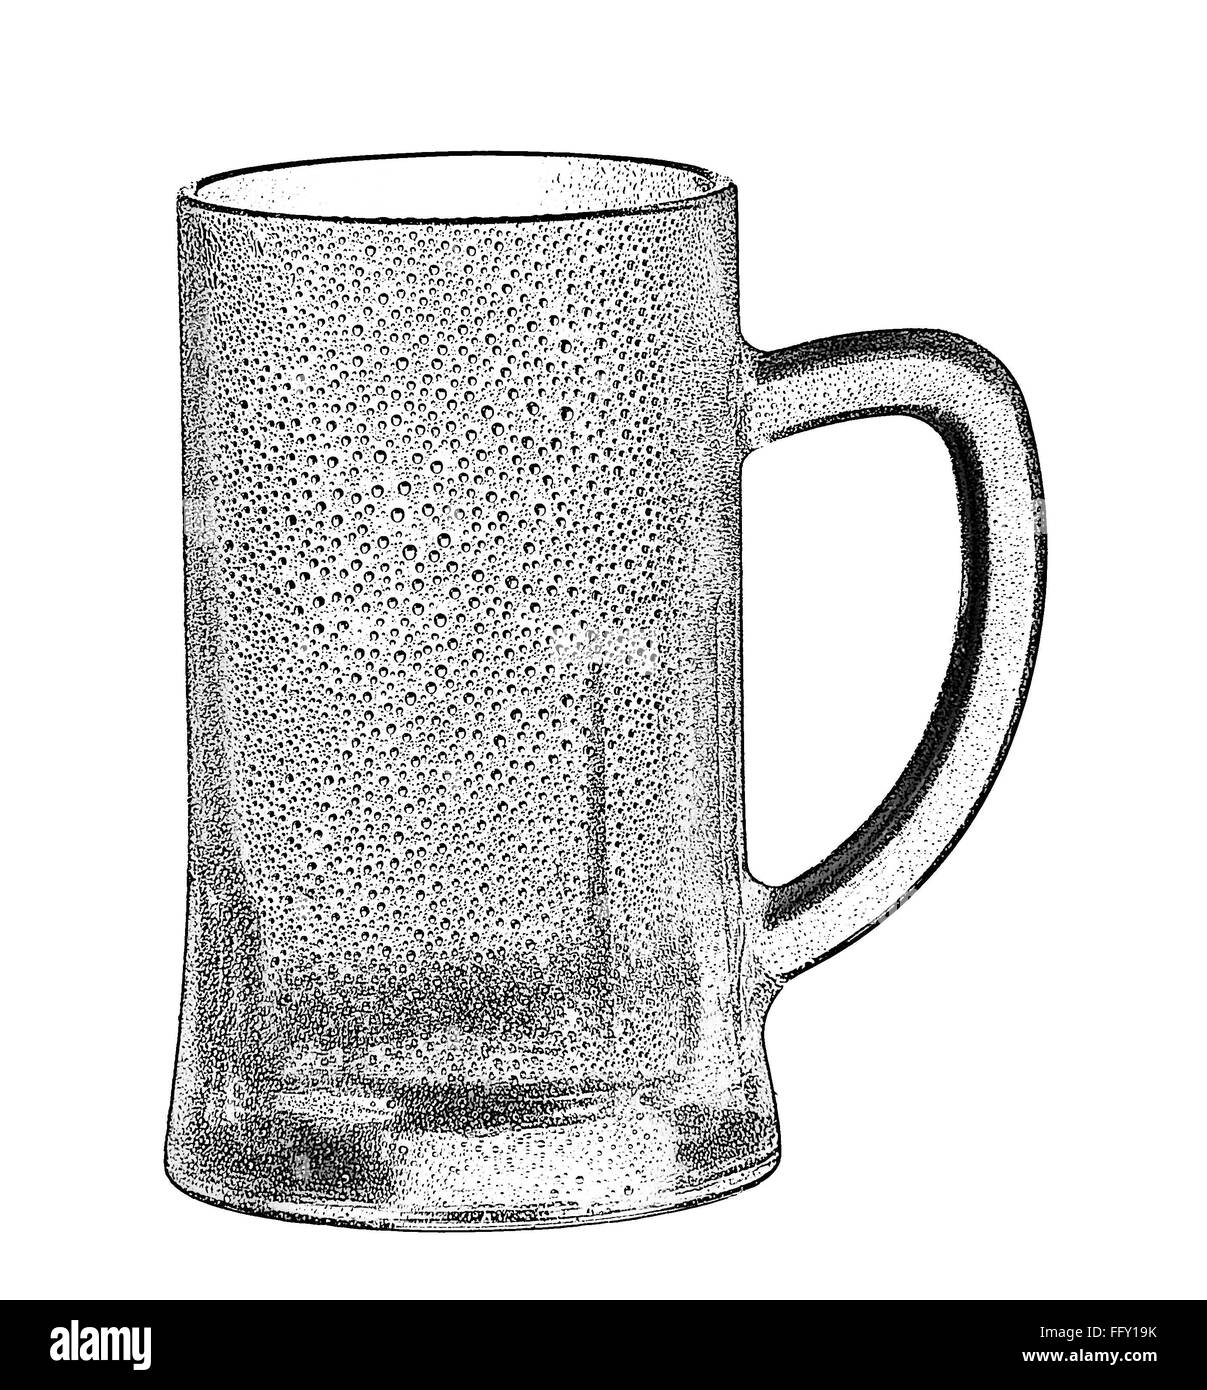 empty beer glass on the white background Stock Photo